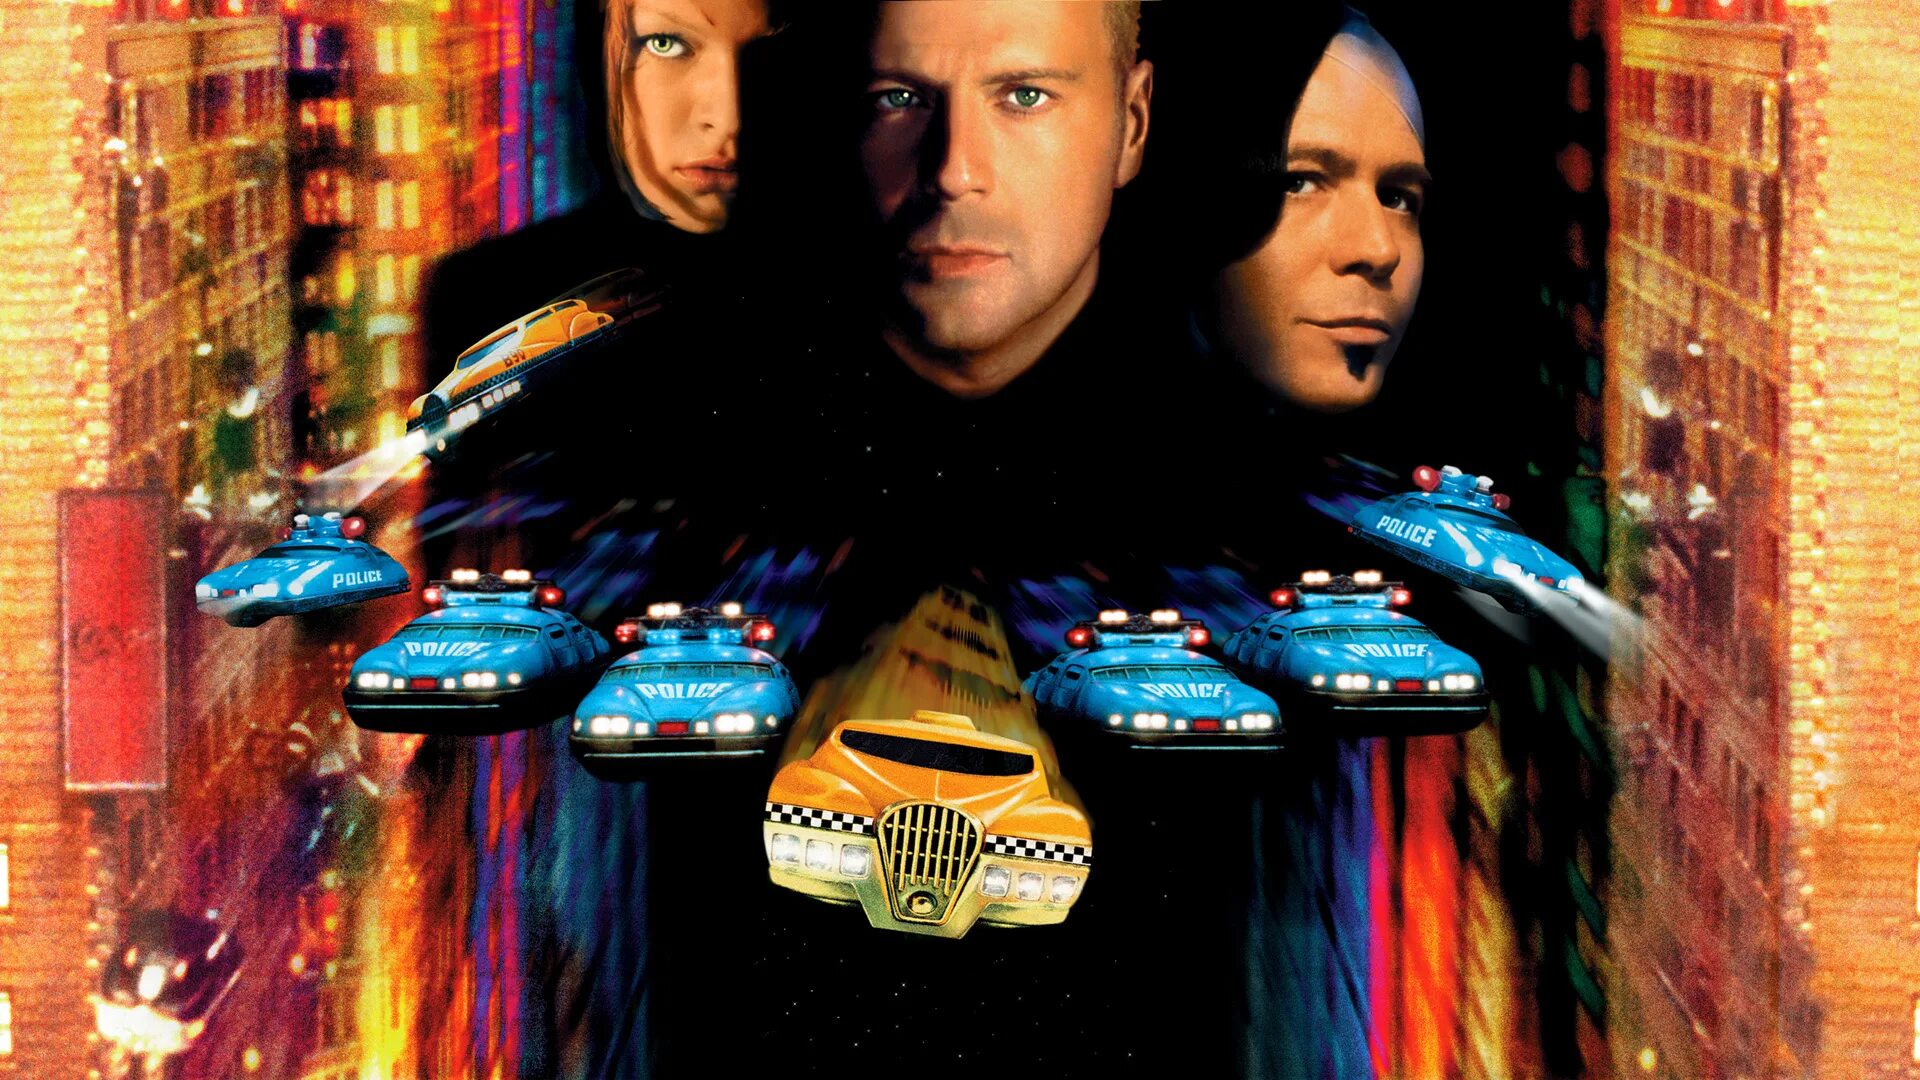 5 элемент 33. The Fifth element 1997. The Fifth element / пятый элемент. Милла Йовович 5 элемент.